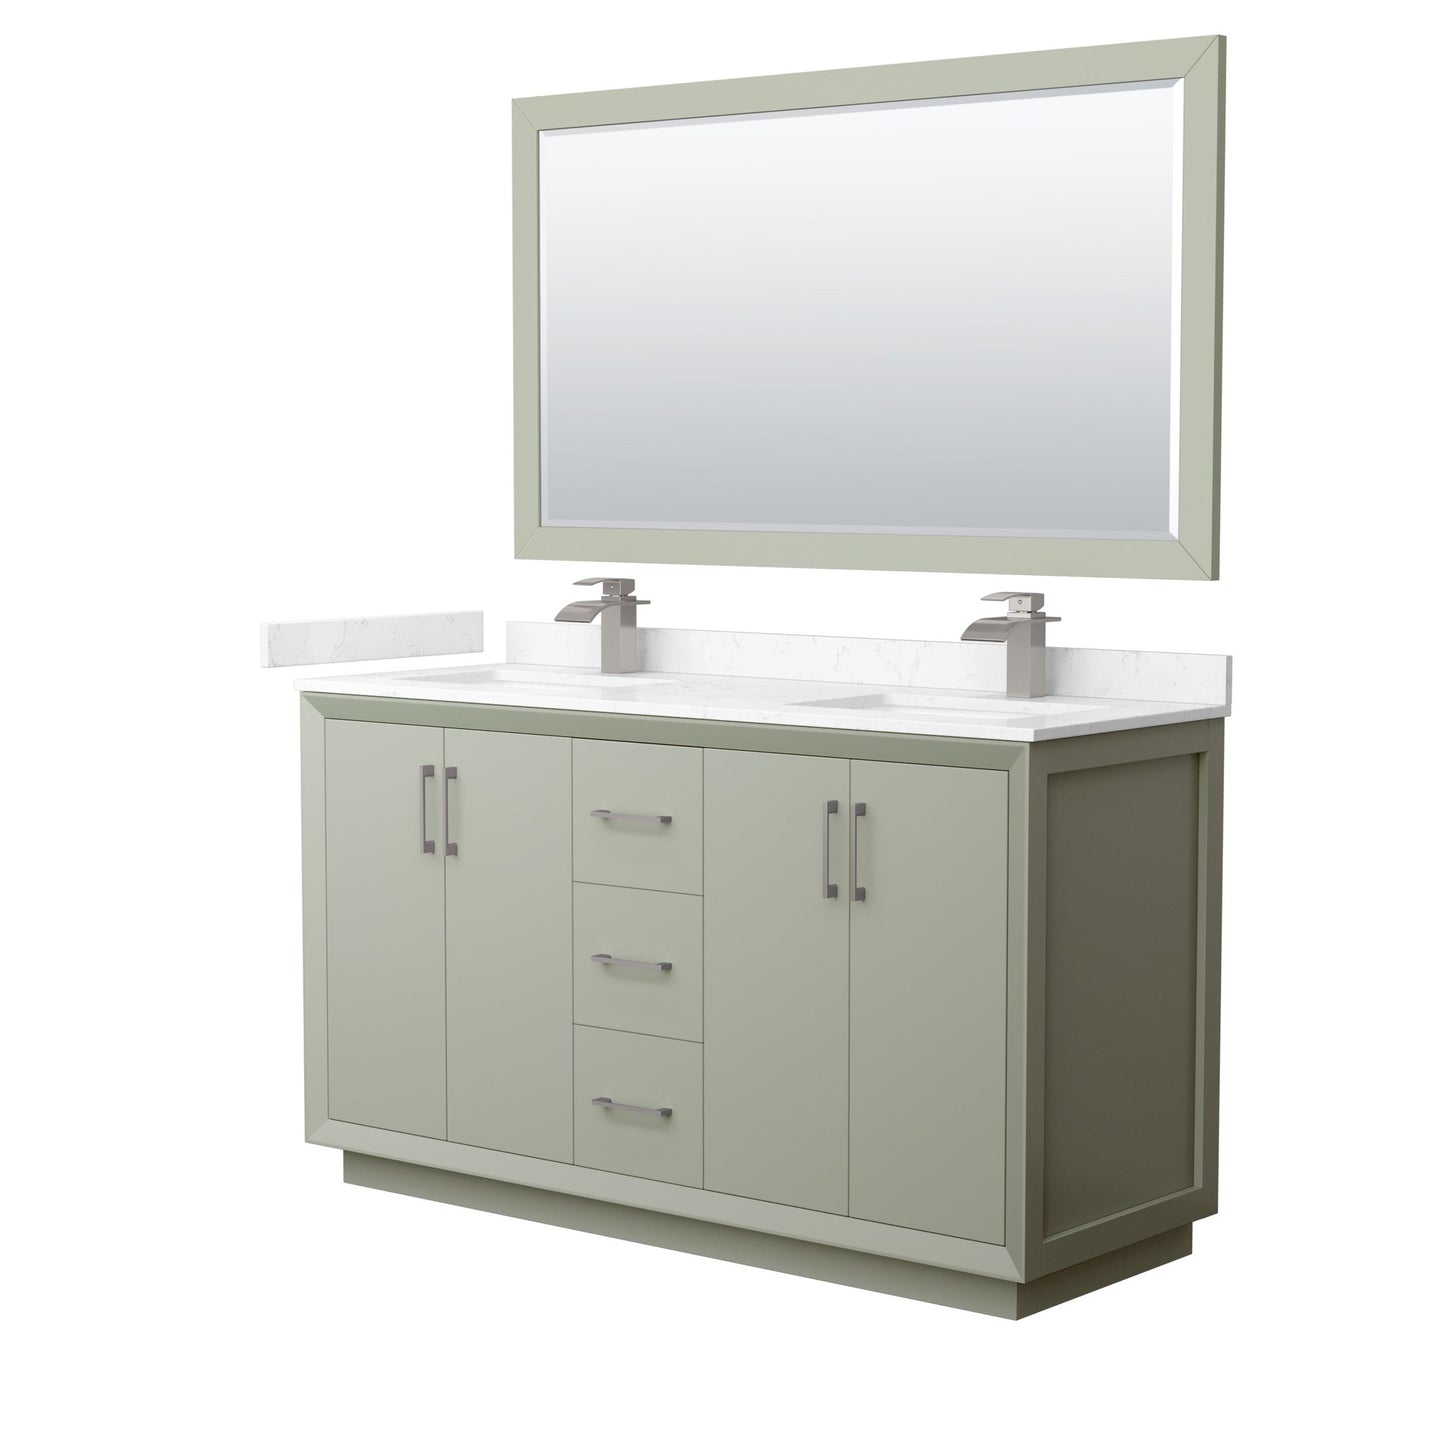 Wyndham Collection Strada 60" Double Bathroom Vanity in Light Green, Carrara Cultured Marble Countertop, Undermount Square Sinks, Brushed Nickel Trim, 58" Mirror